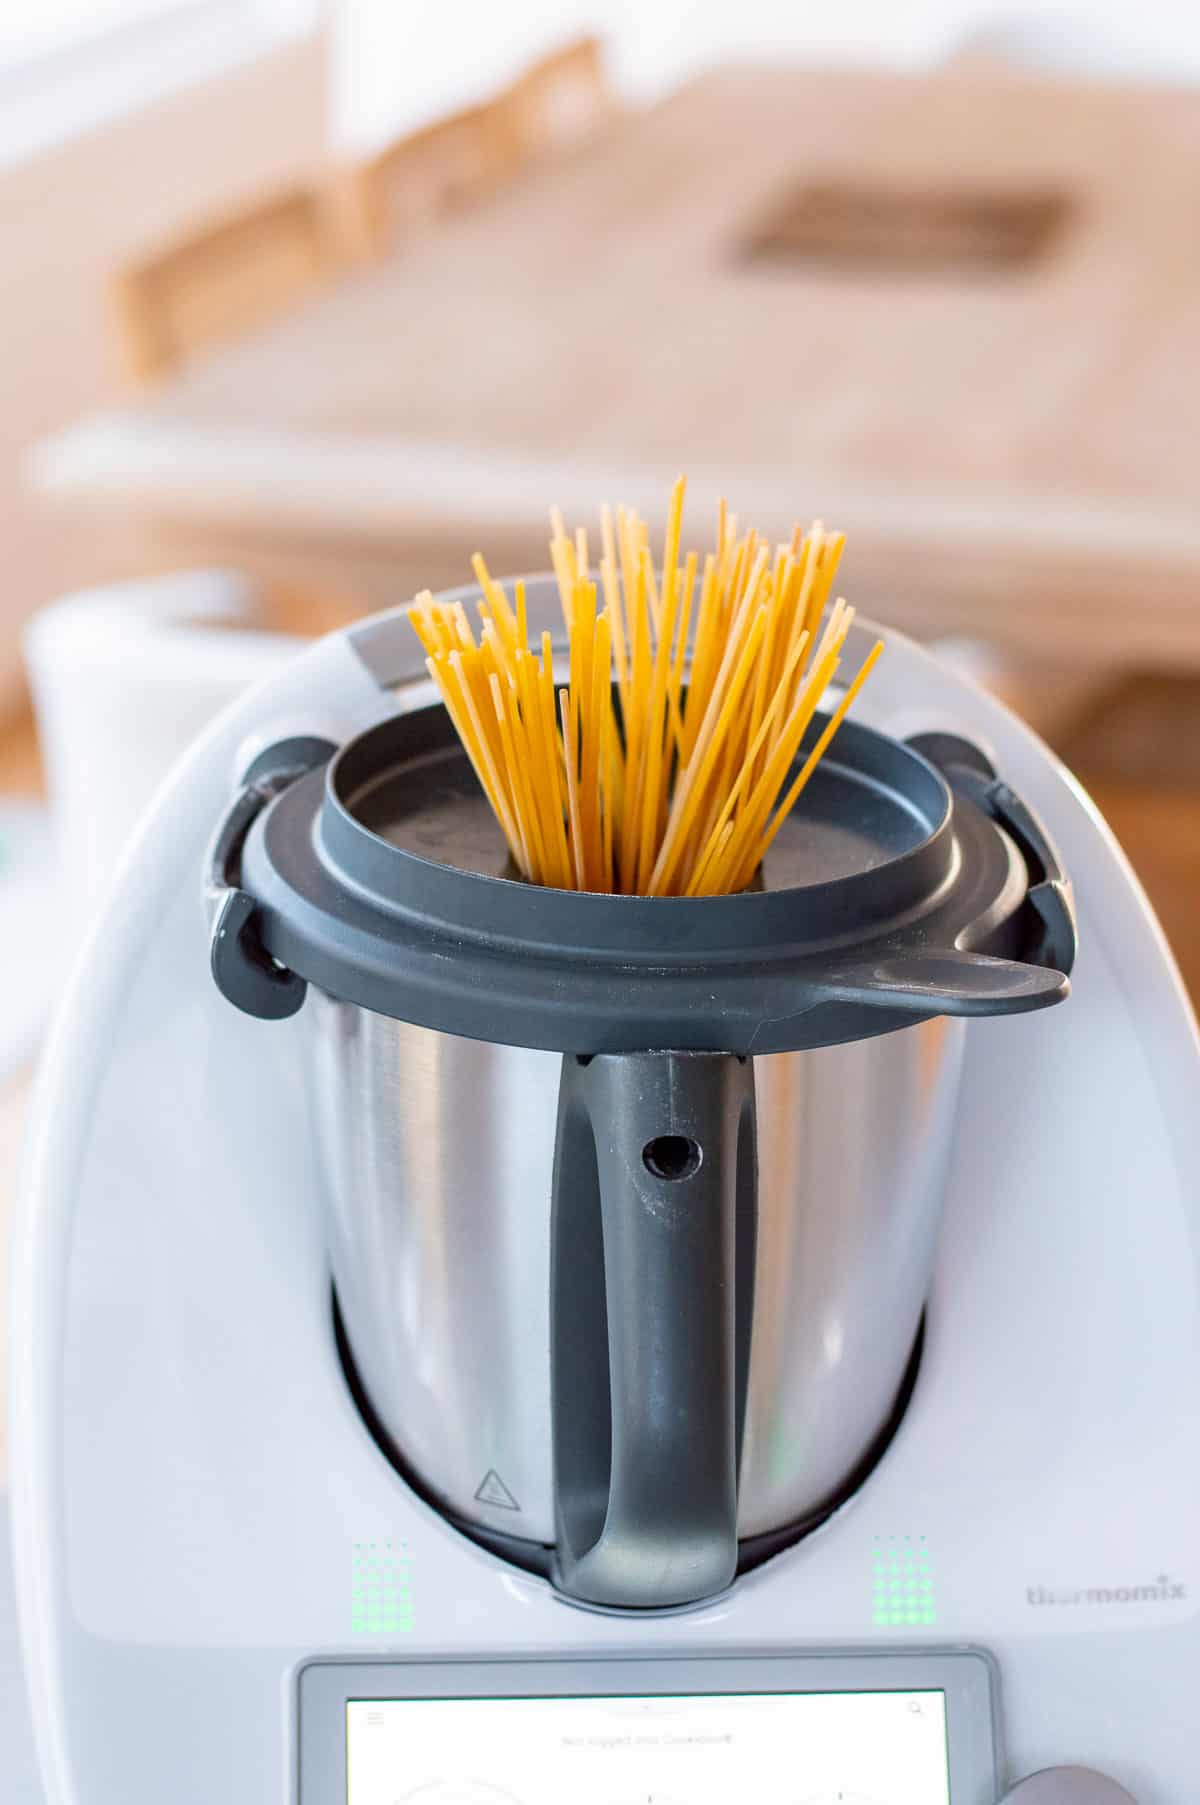 Cooking Spaghetti Pasta in the Thermomix - Thermomix Diva